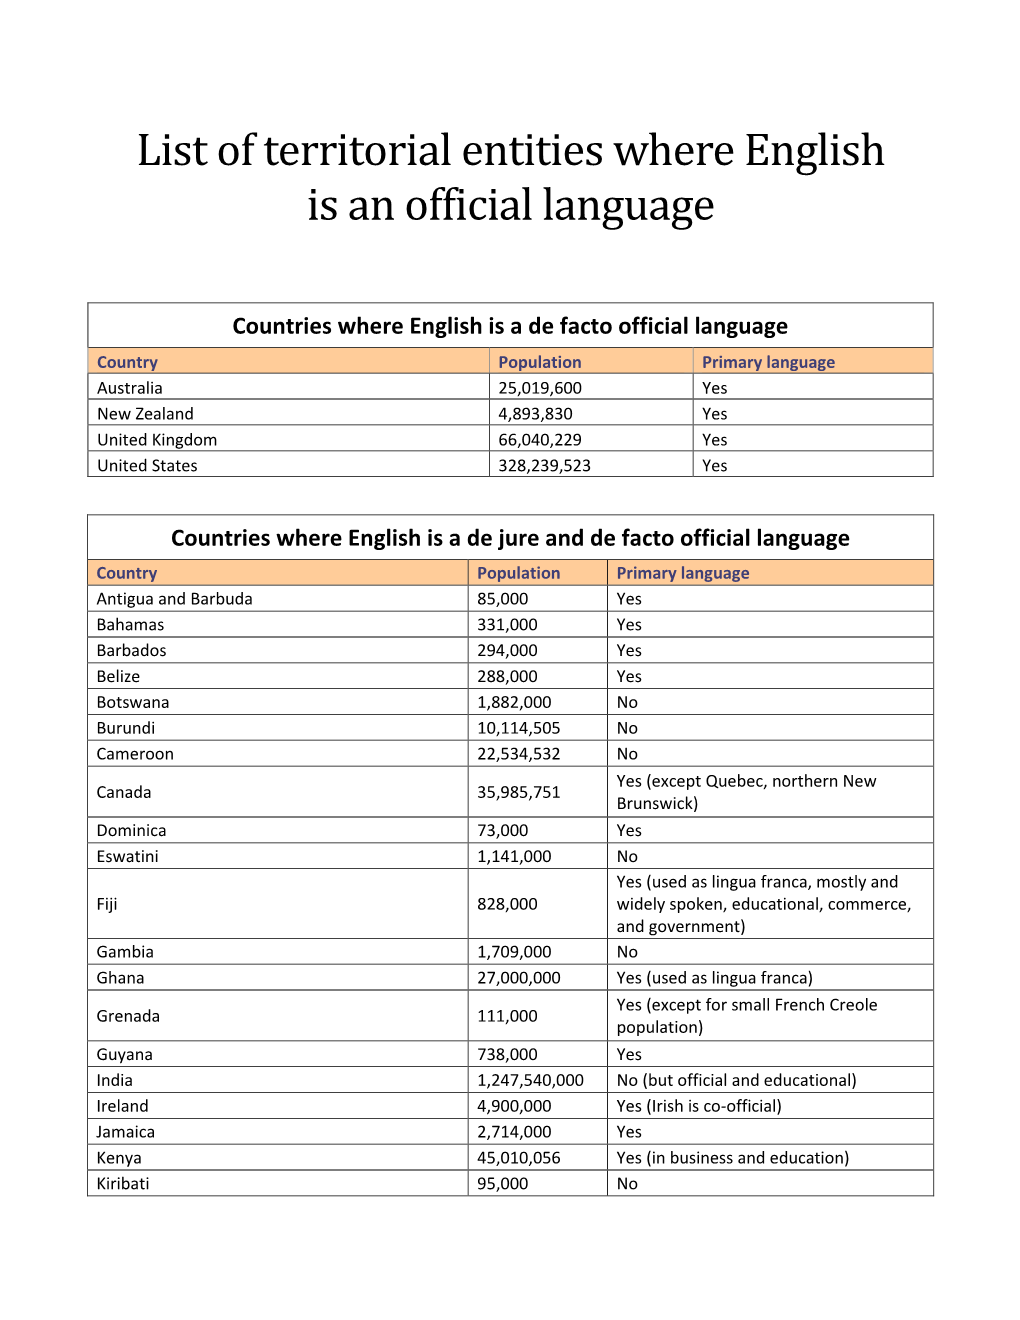 List of Territorial Entities Where English Is an Official Language